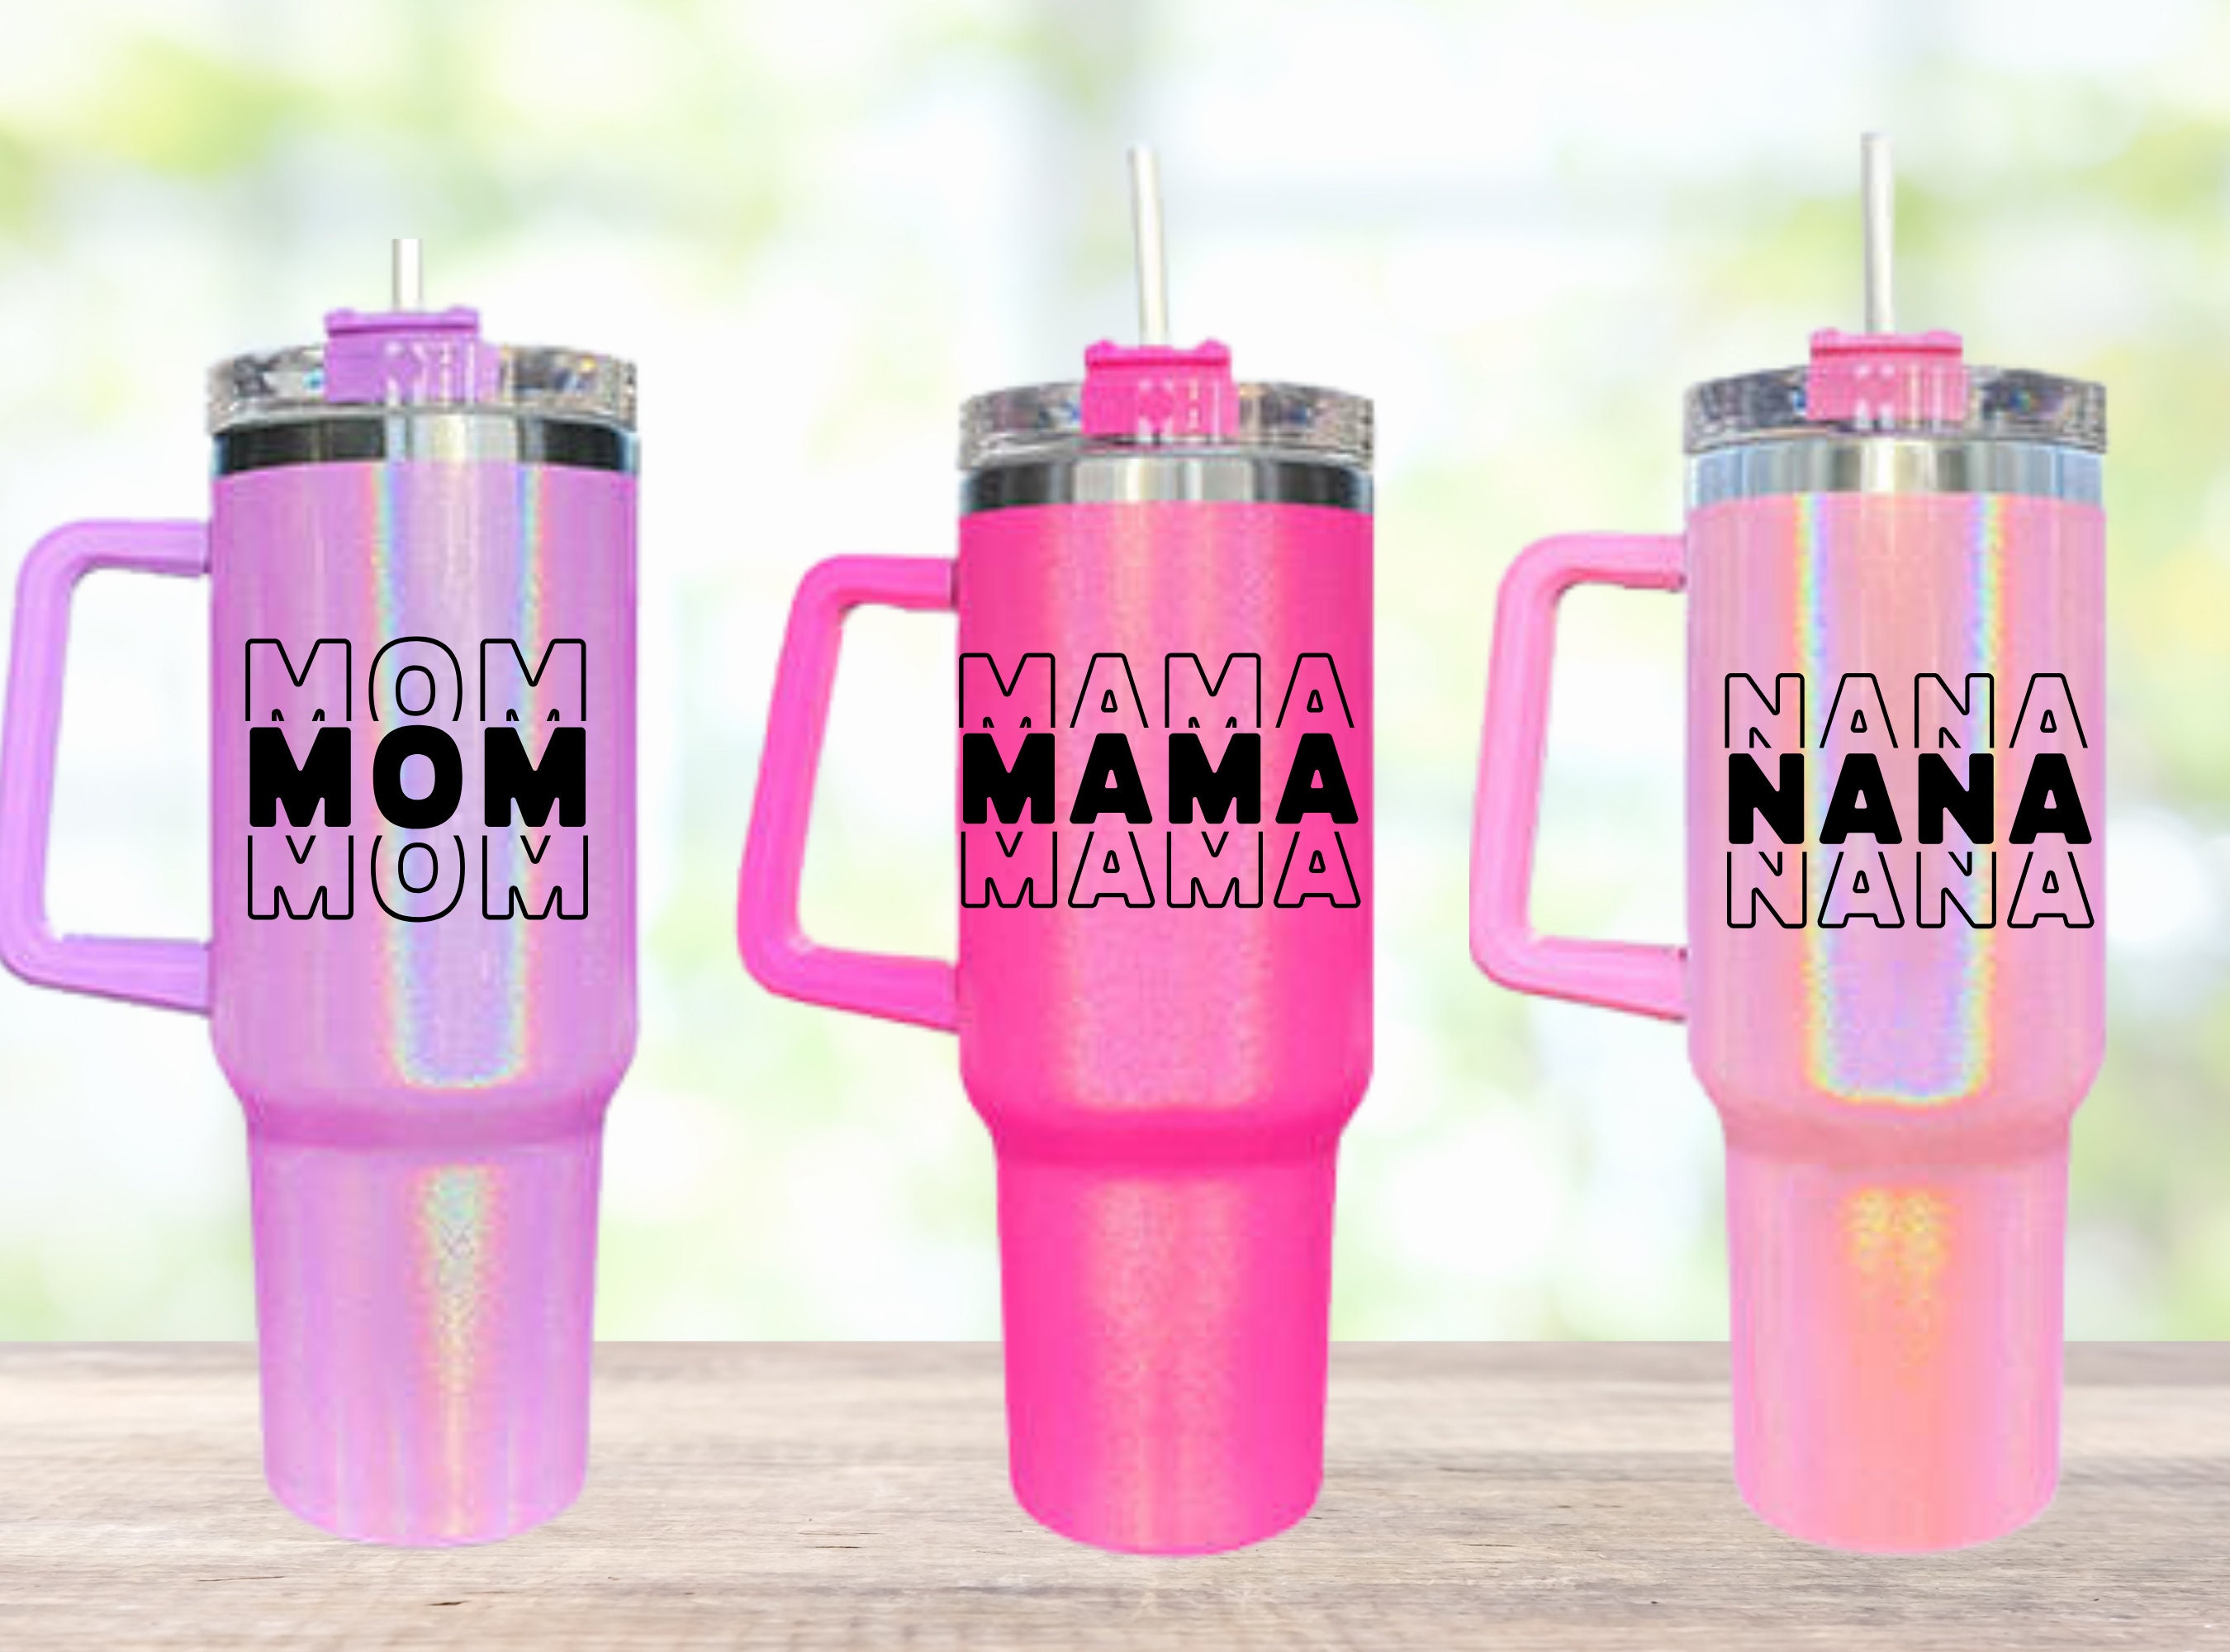 Personalized Tumbler With Handle, 40 Oz Tumbler Floral, Cup for Grandma,  Tumbler for Women, Nana Birthday Gift, Christmas Gift for Mom 